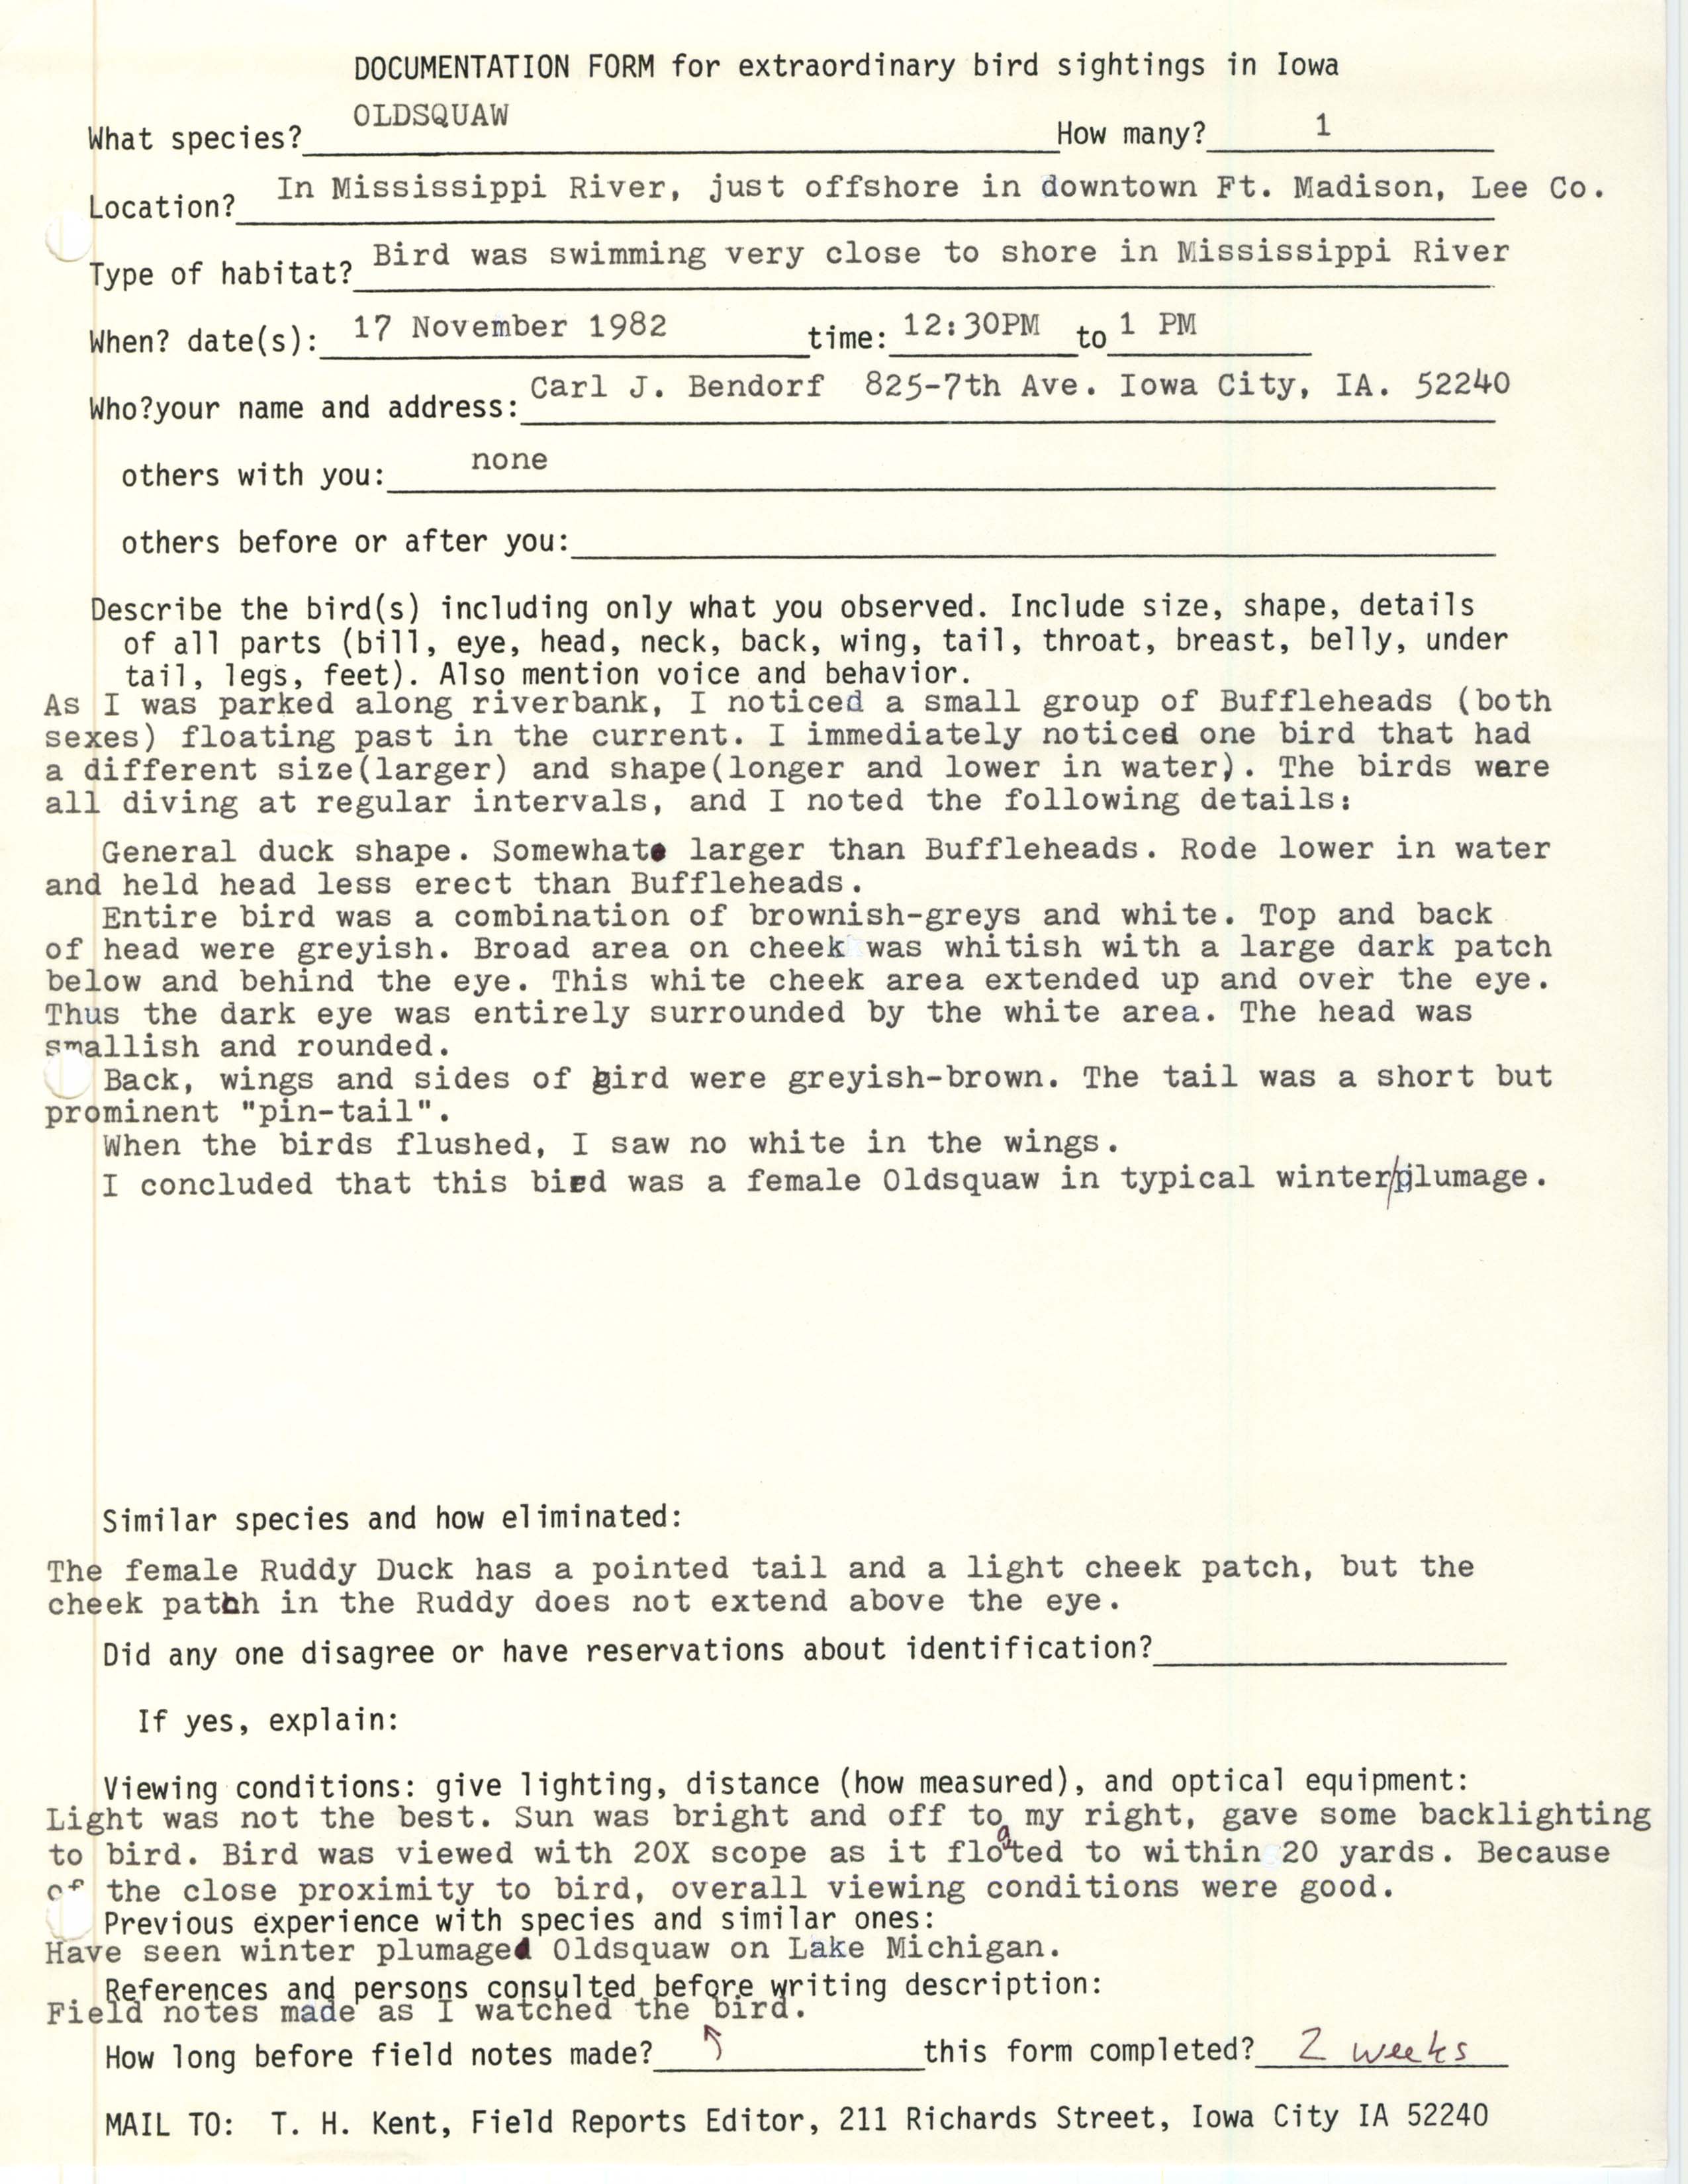 Rare bird documentation form for Long-tailed Duck at Fort Madison, 1982